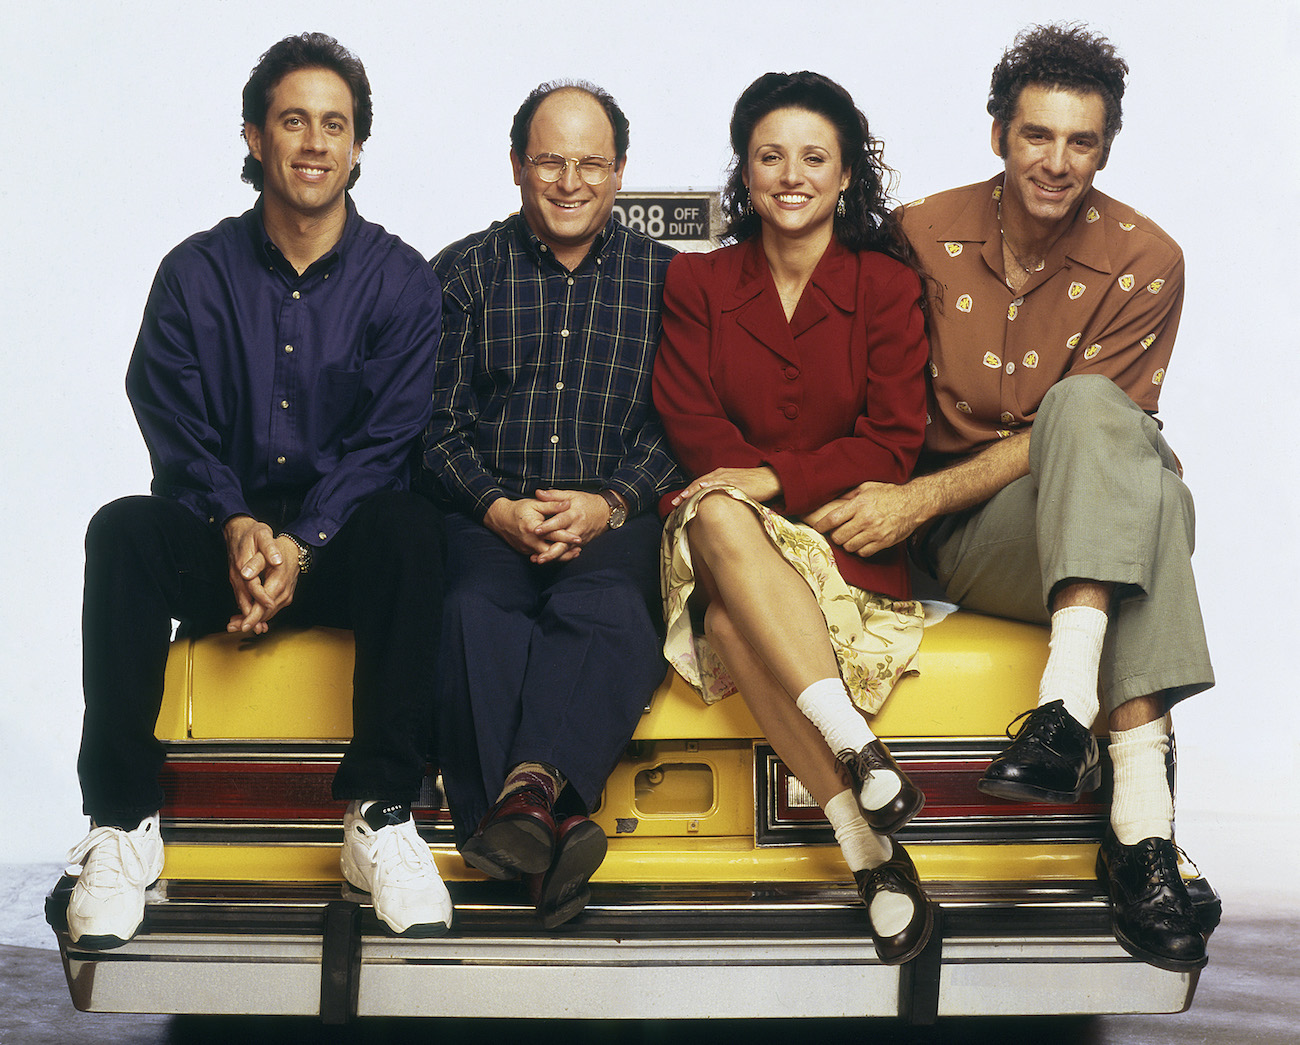 Jerry Seinfeld as Jerry Seinfeld,Jason Alexander as George Costanza, Julia Louis-Dreyfus as Elaine Benes, and Michael Richards as Cosmo Kramer on 'Seinfeld'